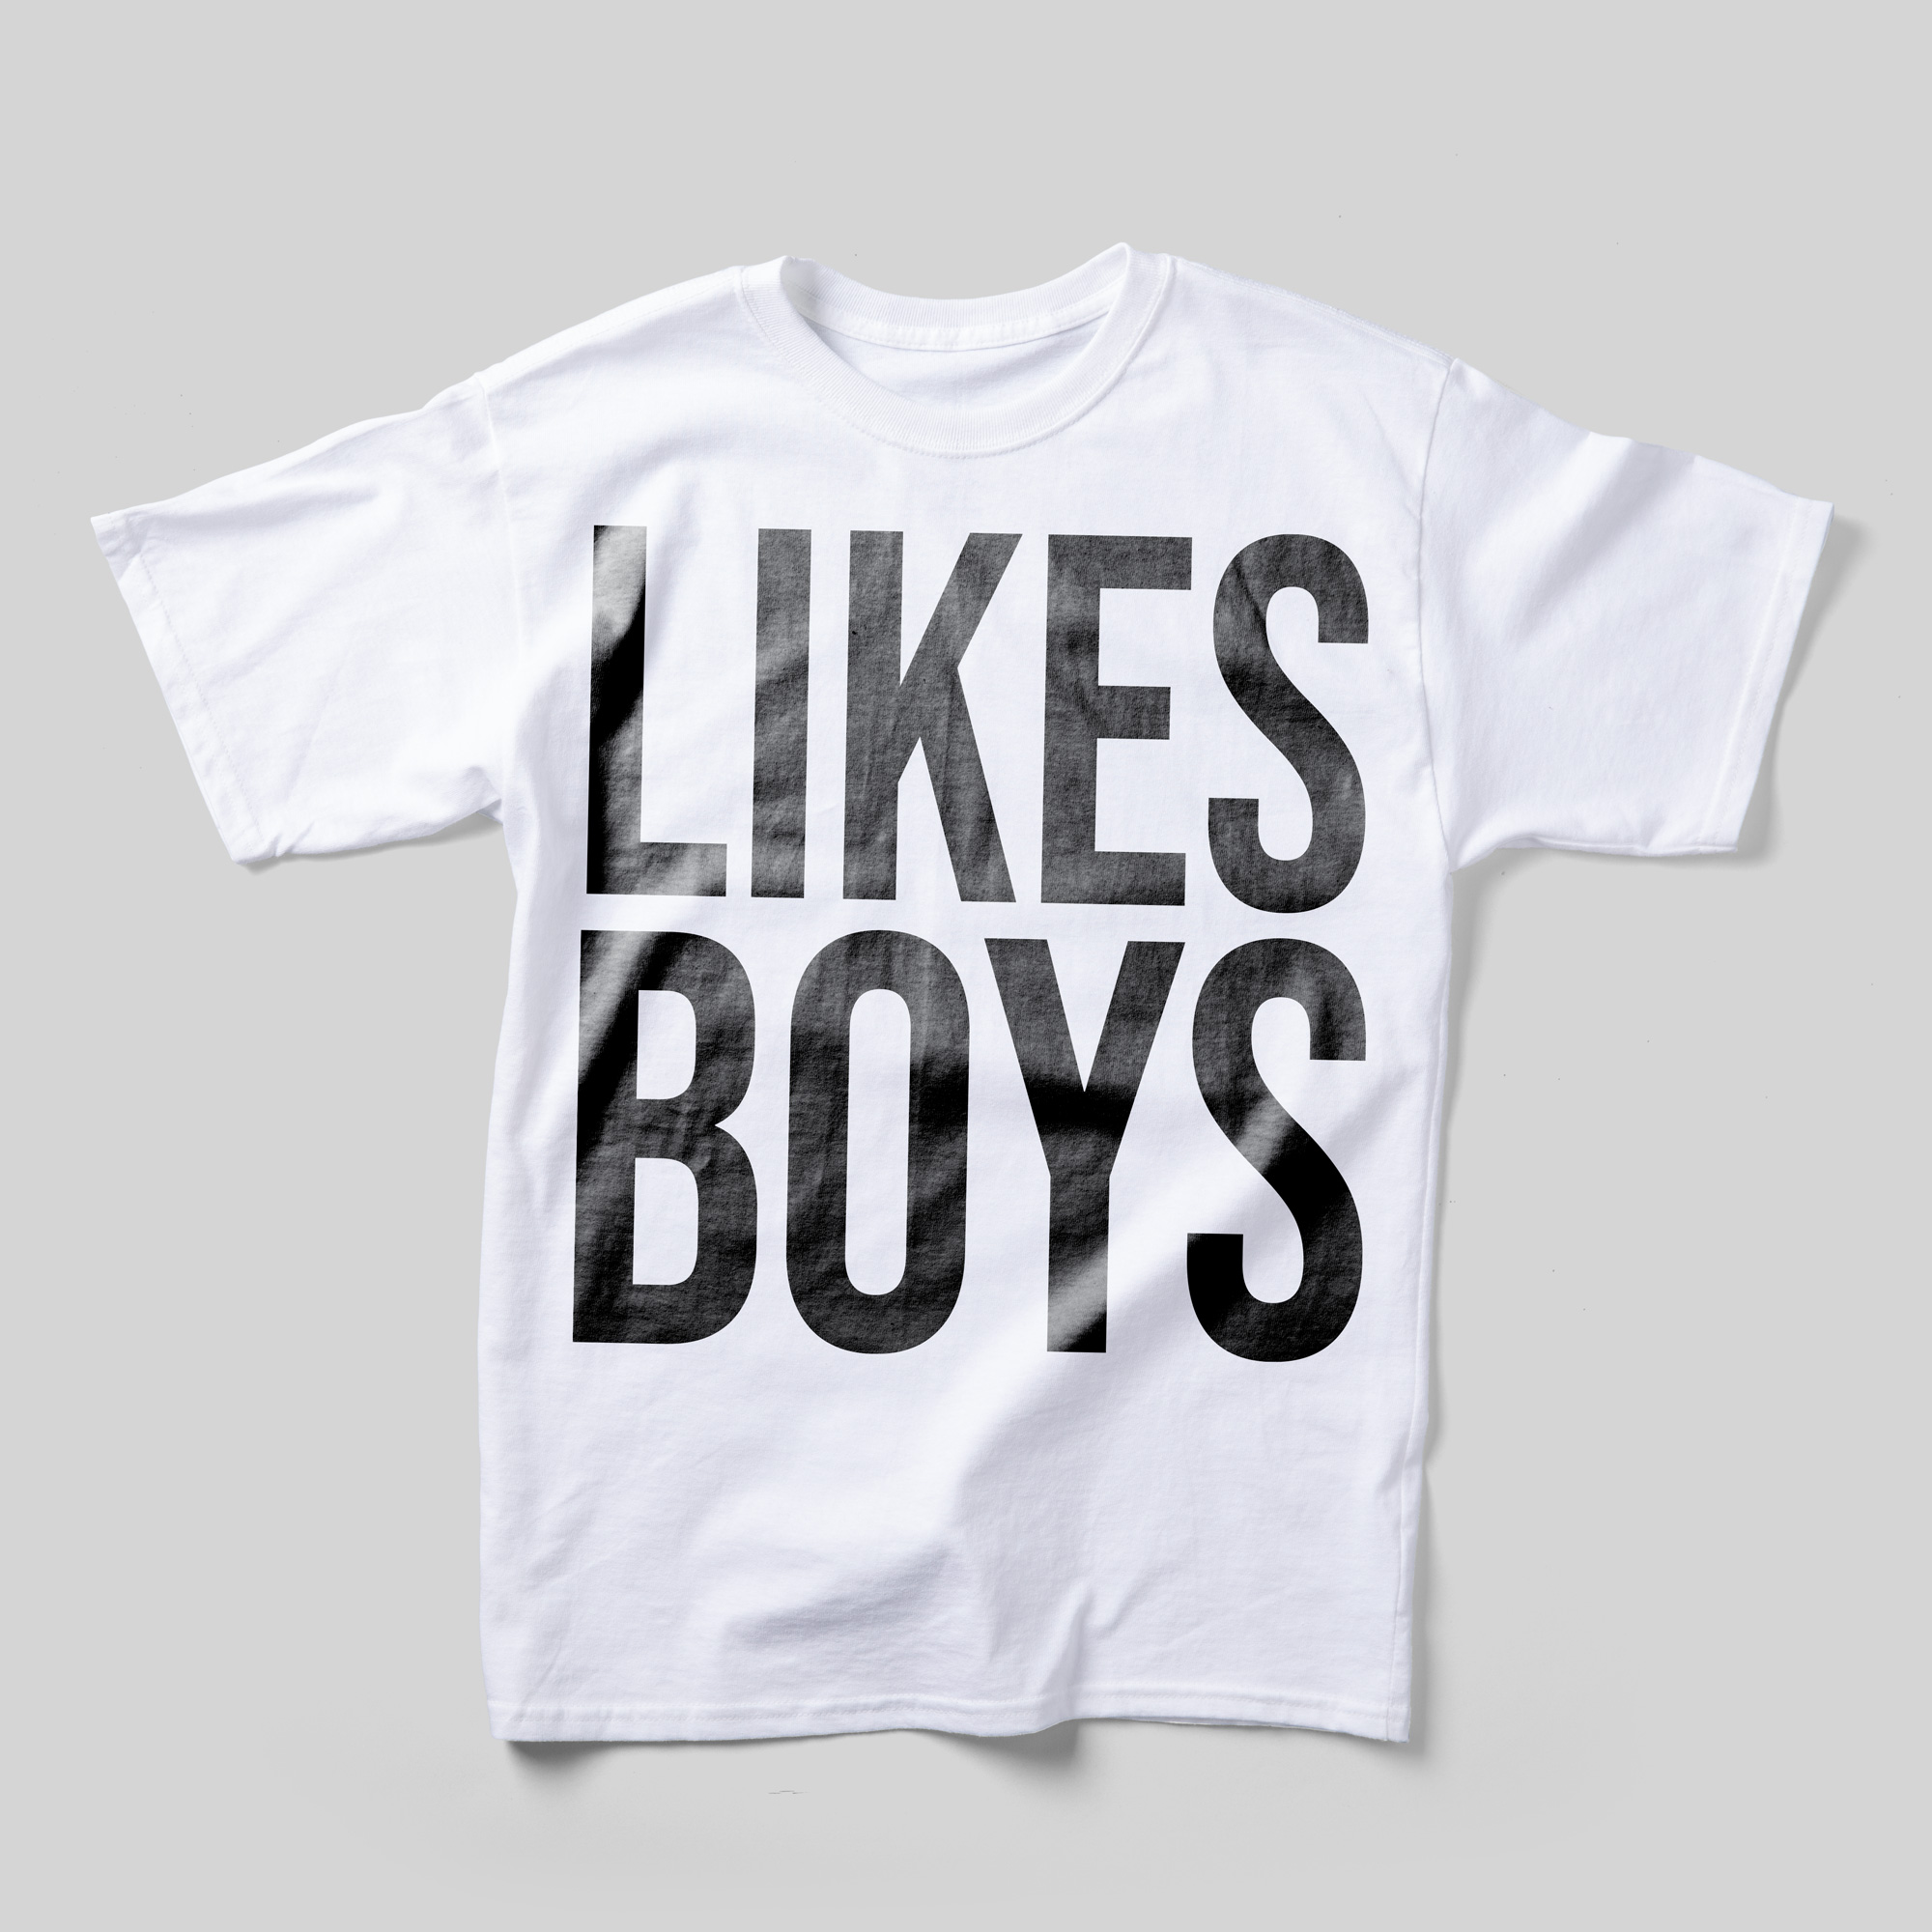 A white t-shirt that reads "Likes Boys" in large black text that takes up the entire front.